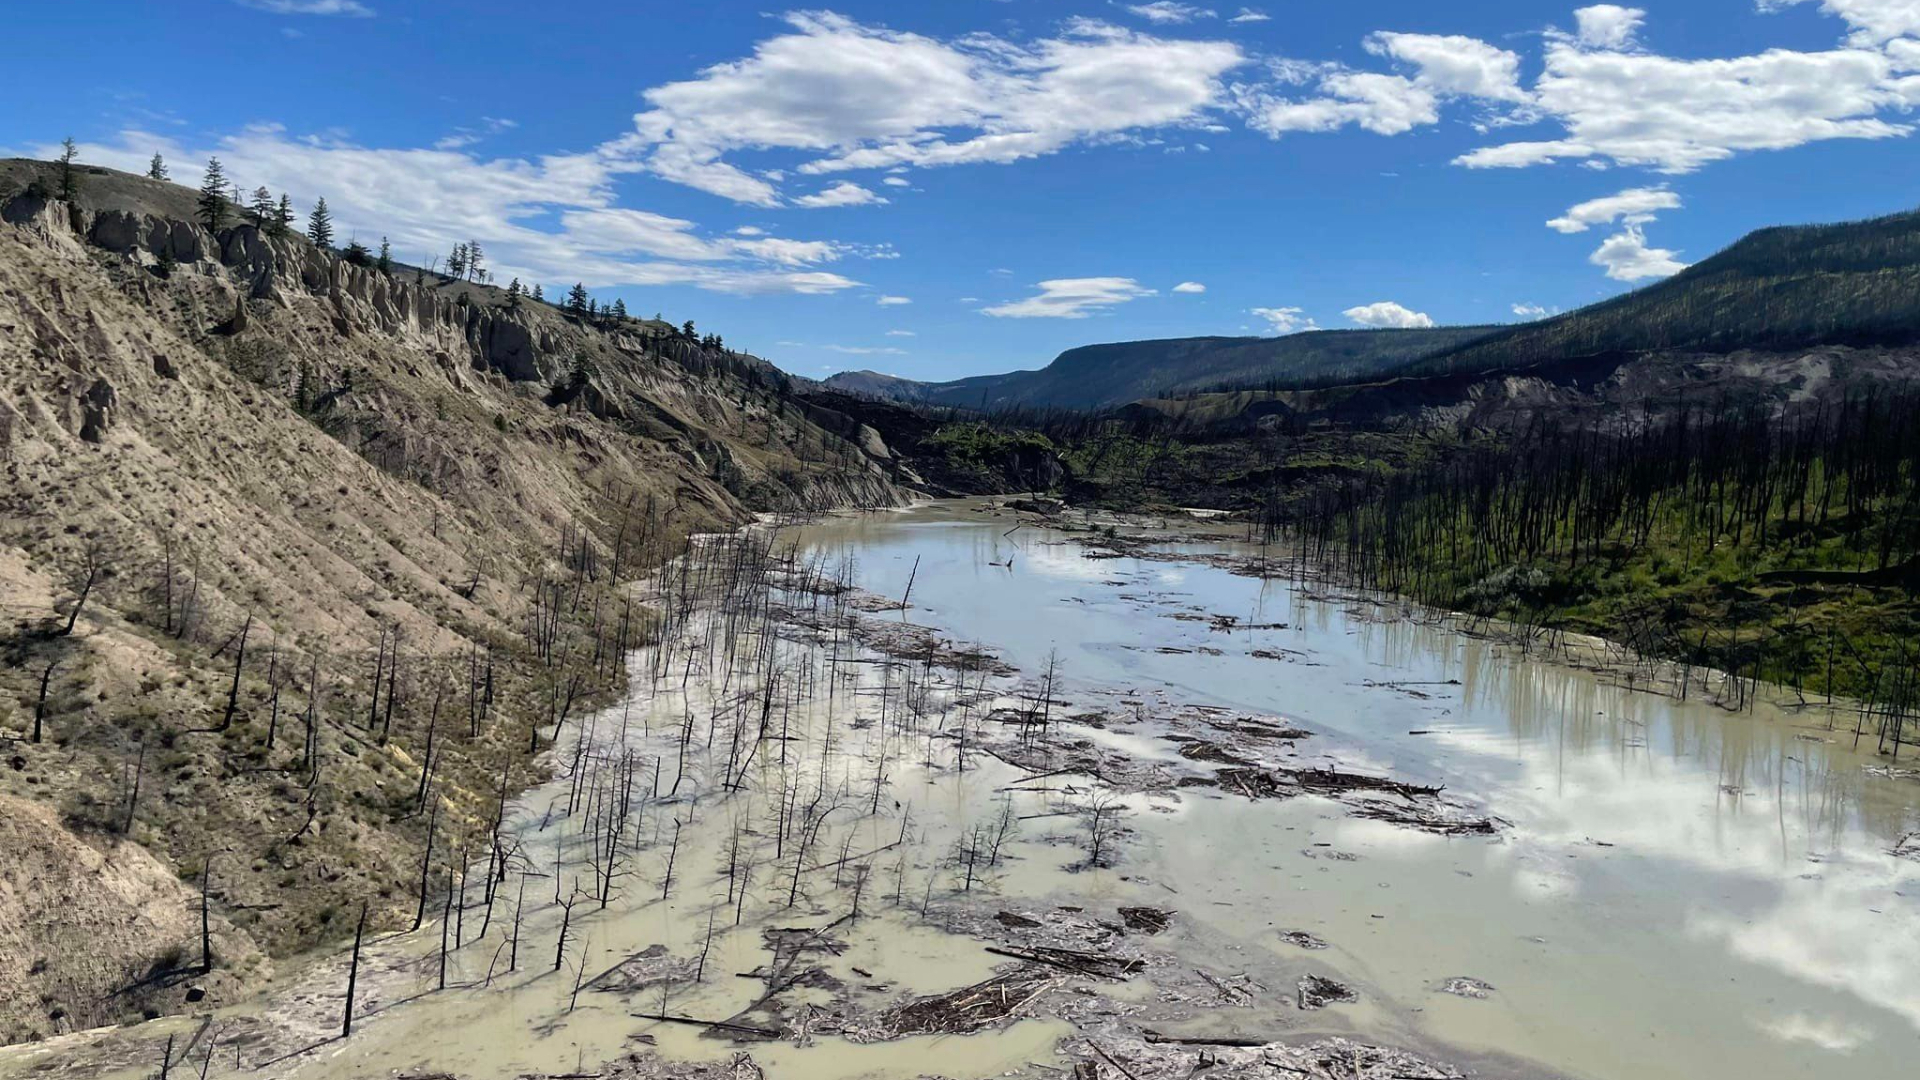 Chilcotin River could breach landslide dam within 24-48 hours: Cariboo Regional District